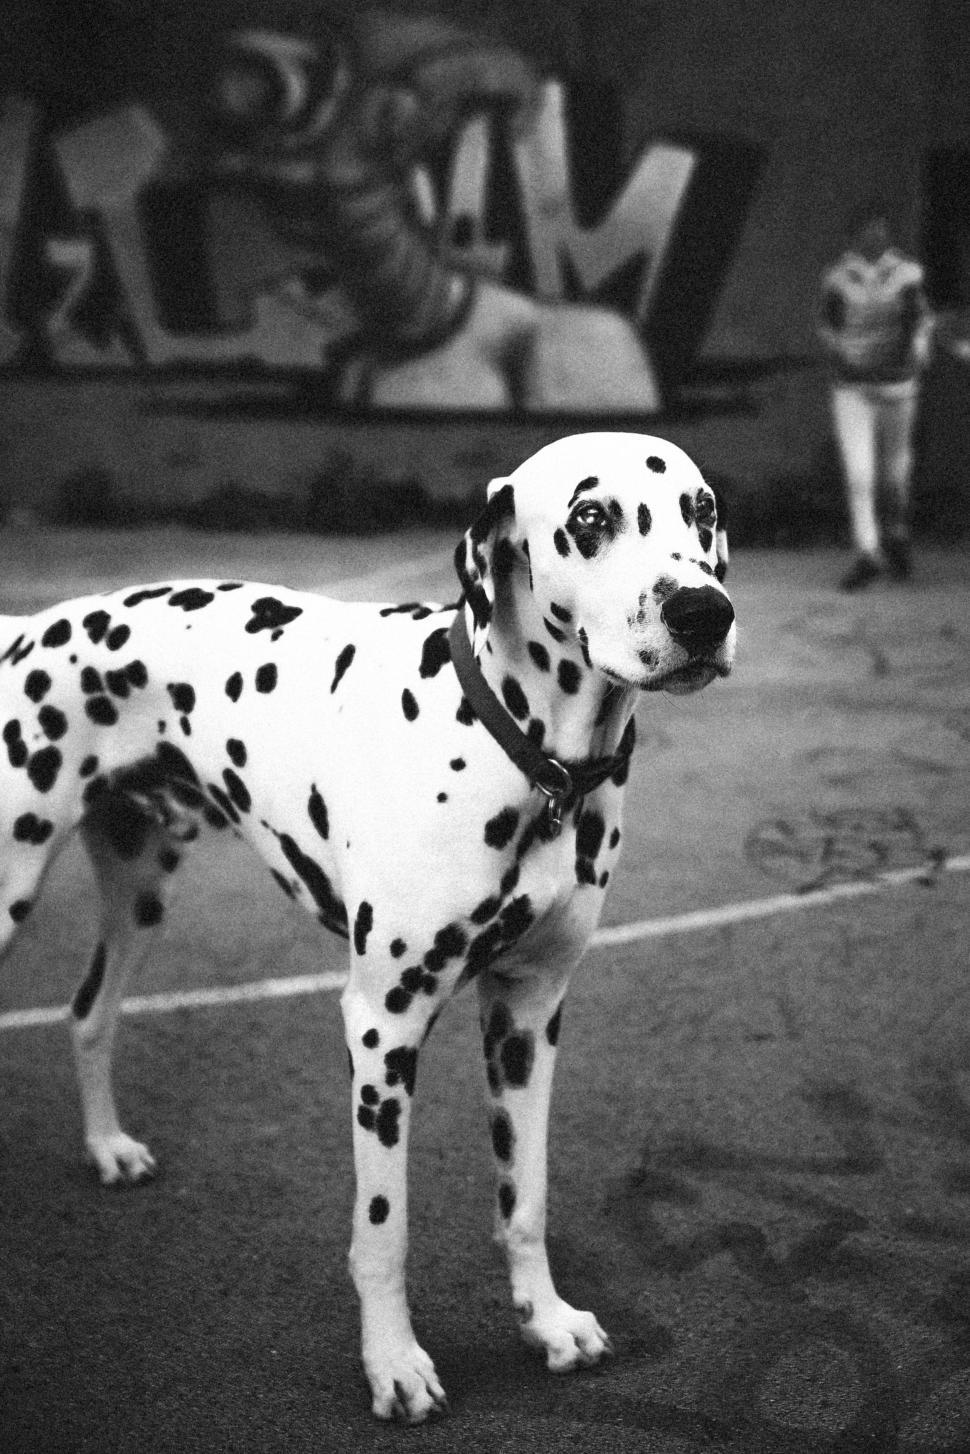 Free Image of Dalmatian Dog Standing on Tennis Court 